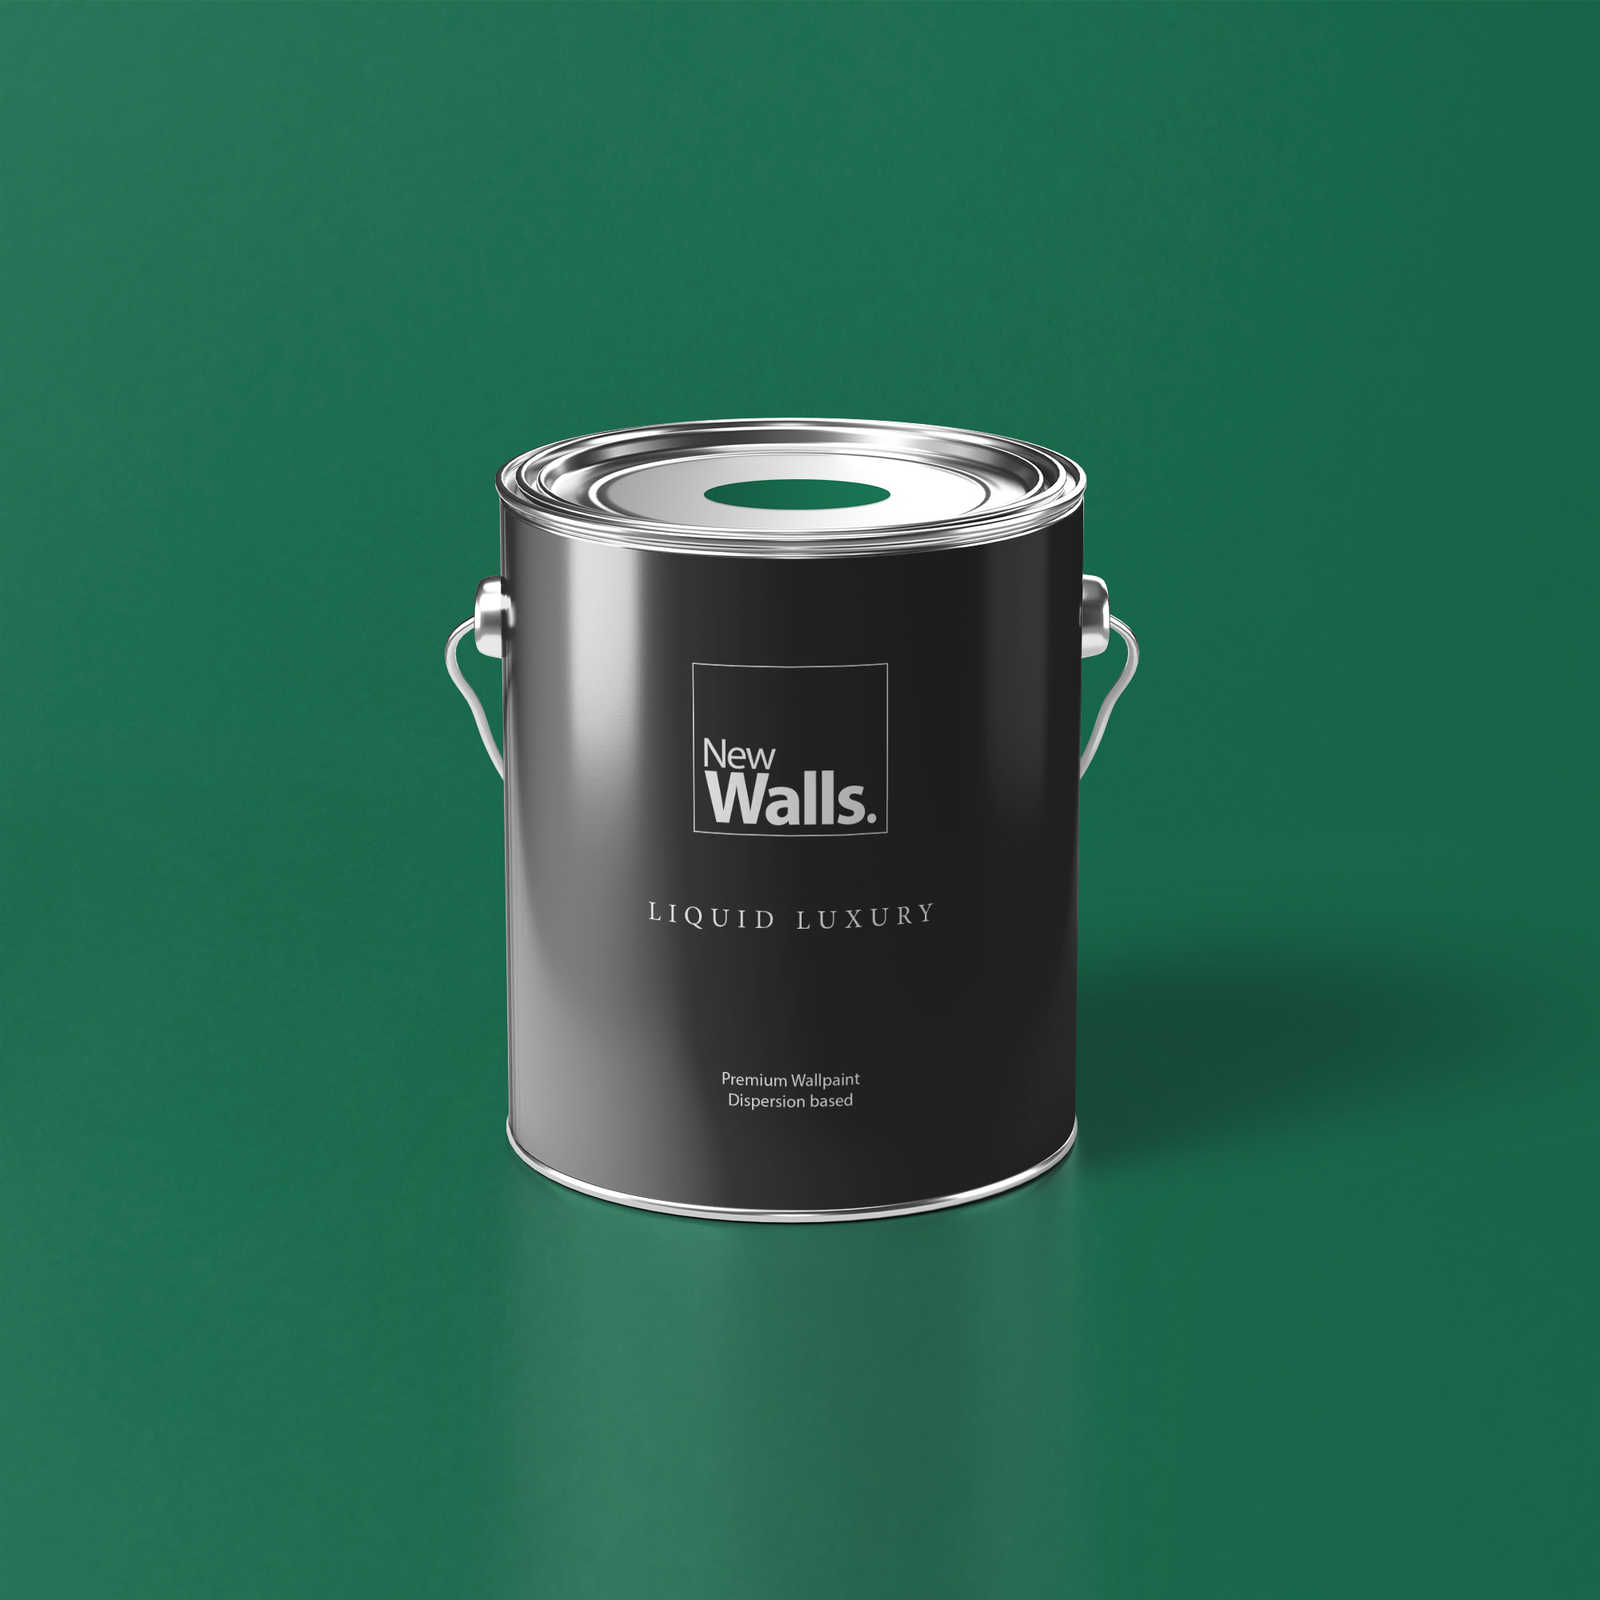 Premium Wall Paint Nature Bottle Green »Gorgeous Green« NW500 – 5 litre
